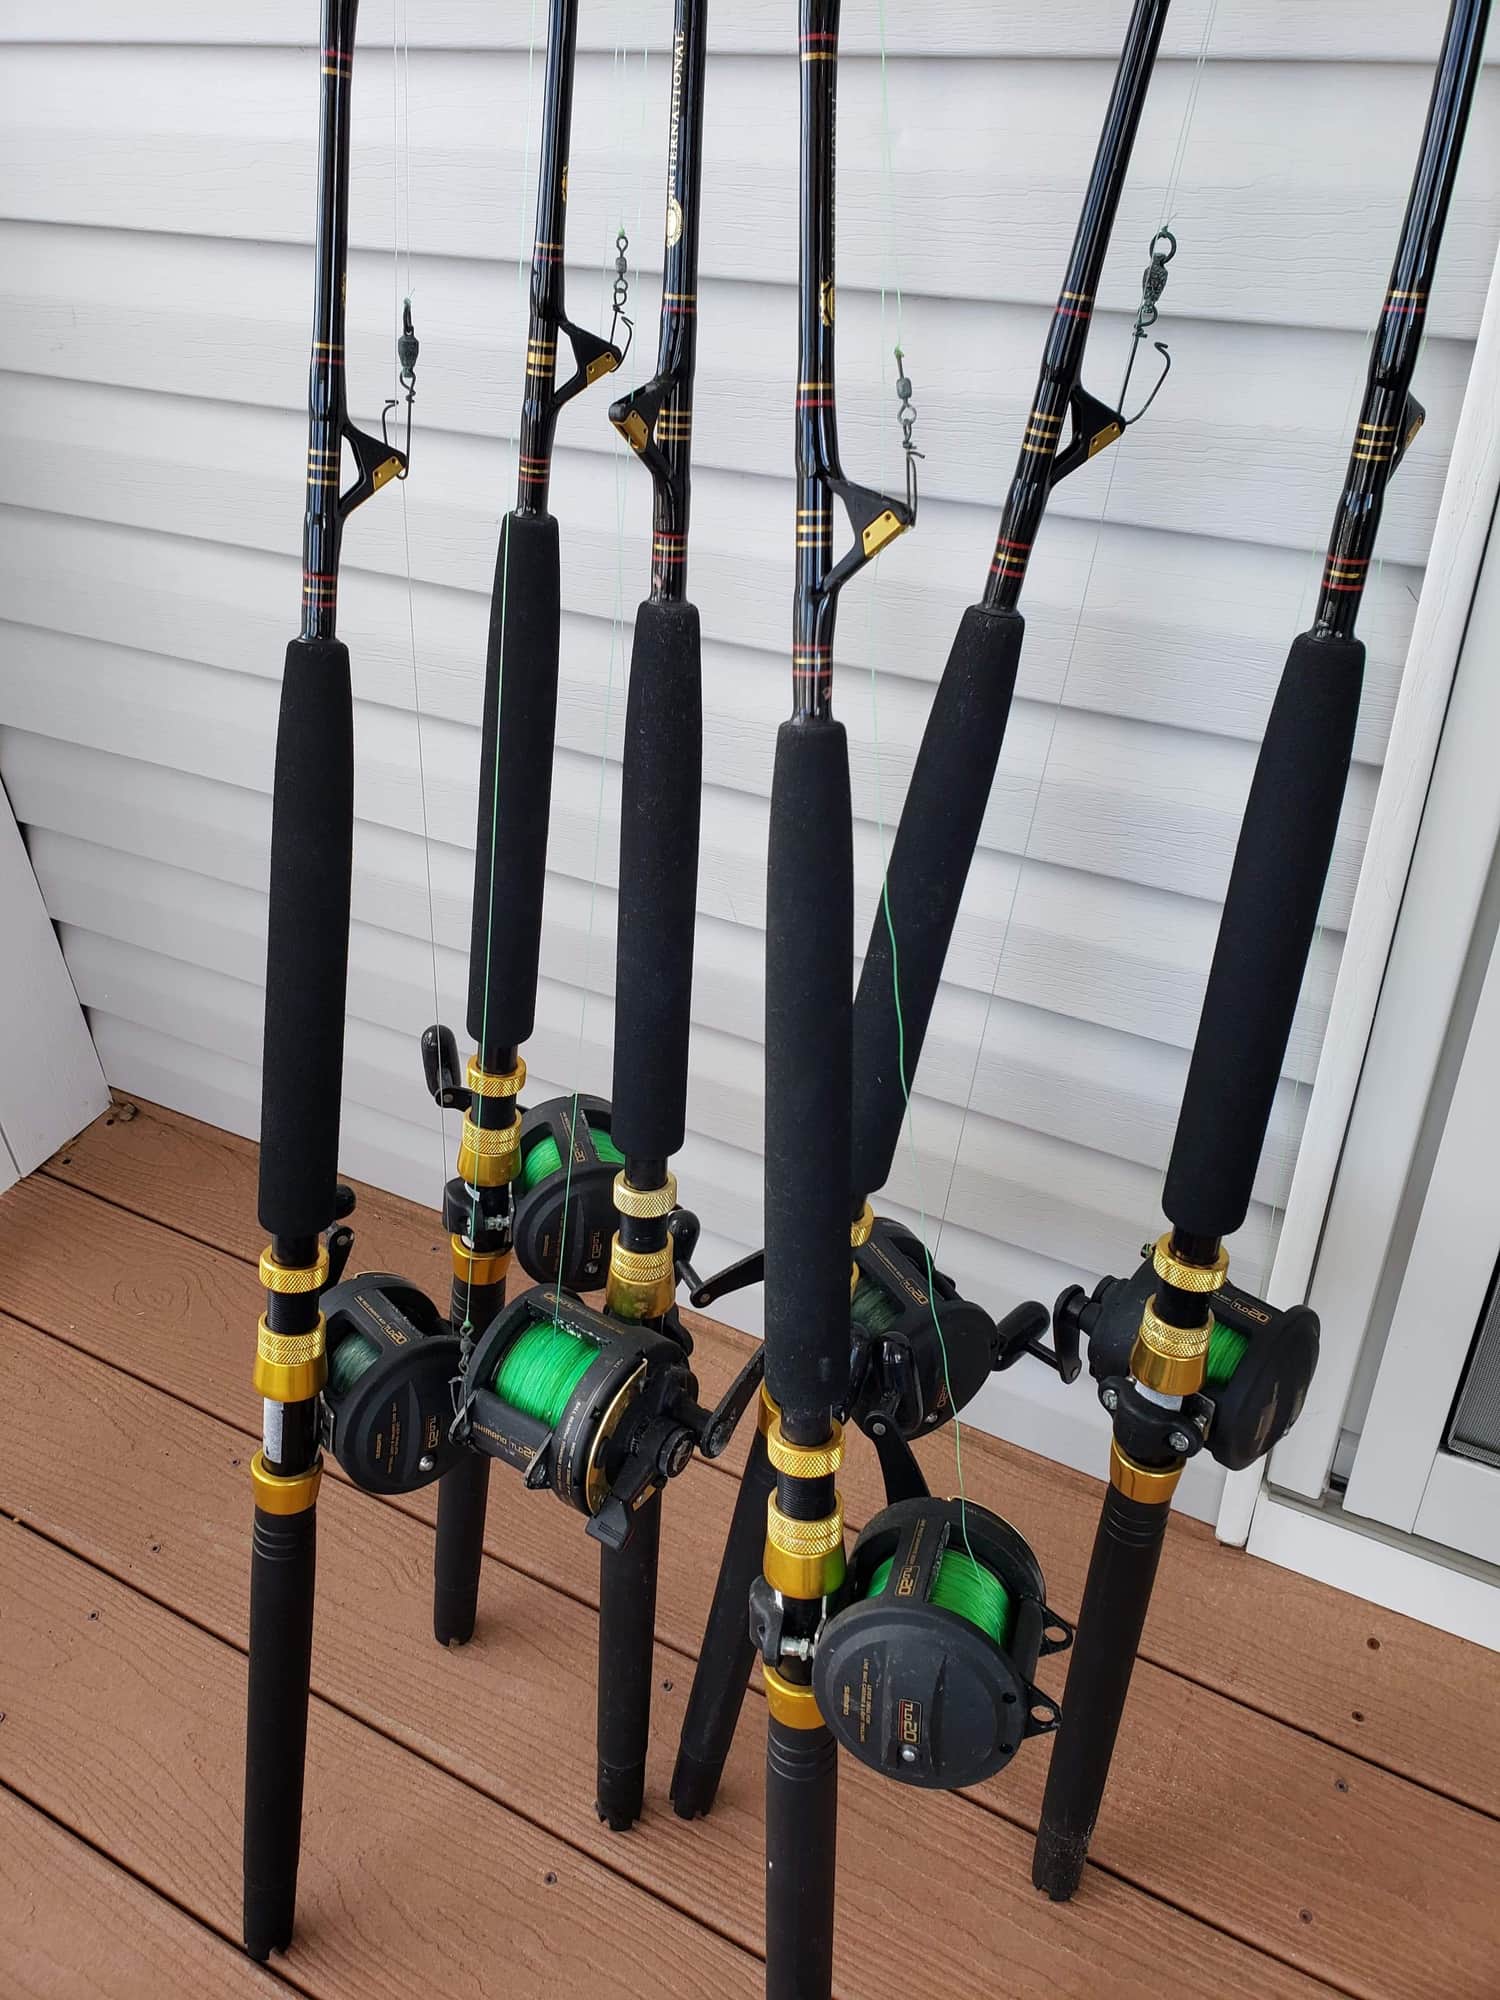 6x Shimano tld 20's on Penn international rods - The Hull Truth